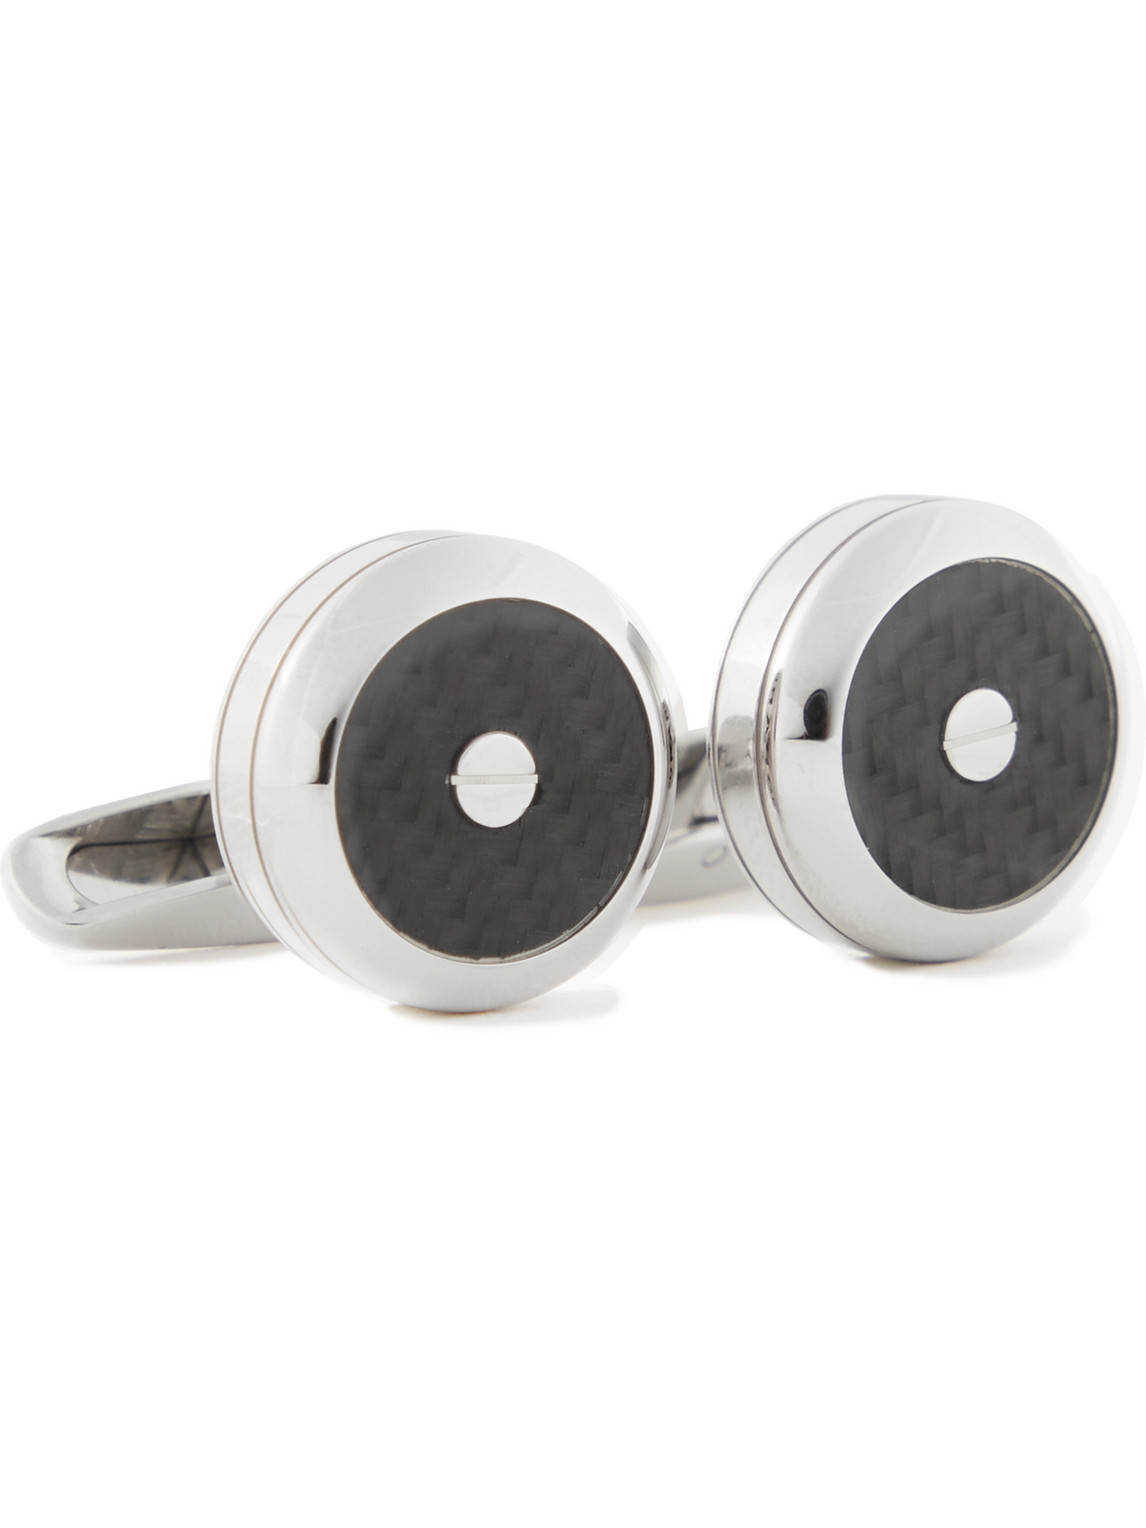 Classic Racing Engraved Stainless Steel and Carbon Fibre Cufflinks